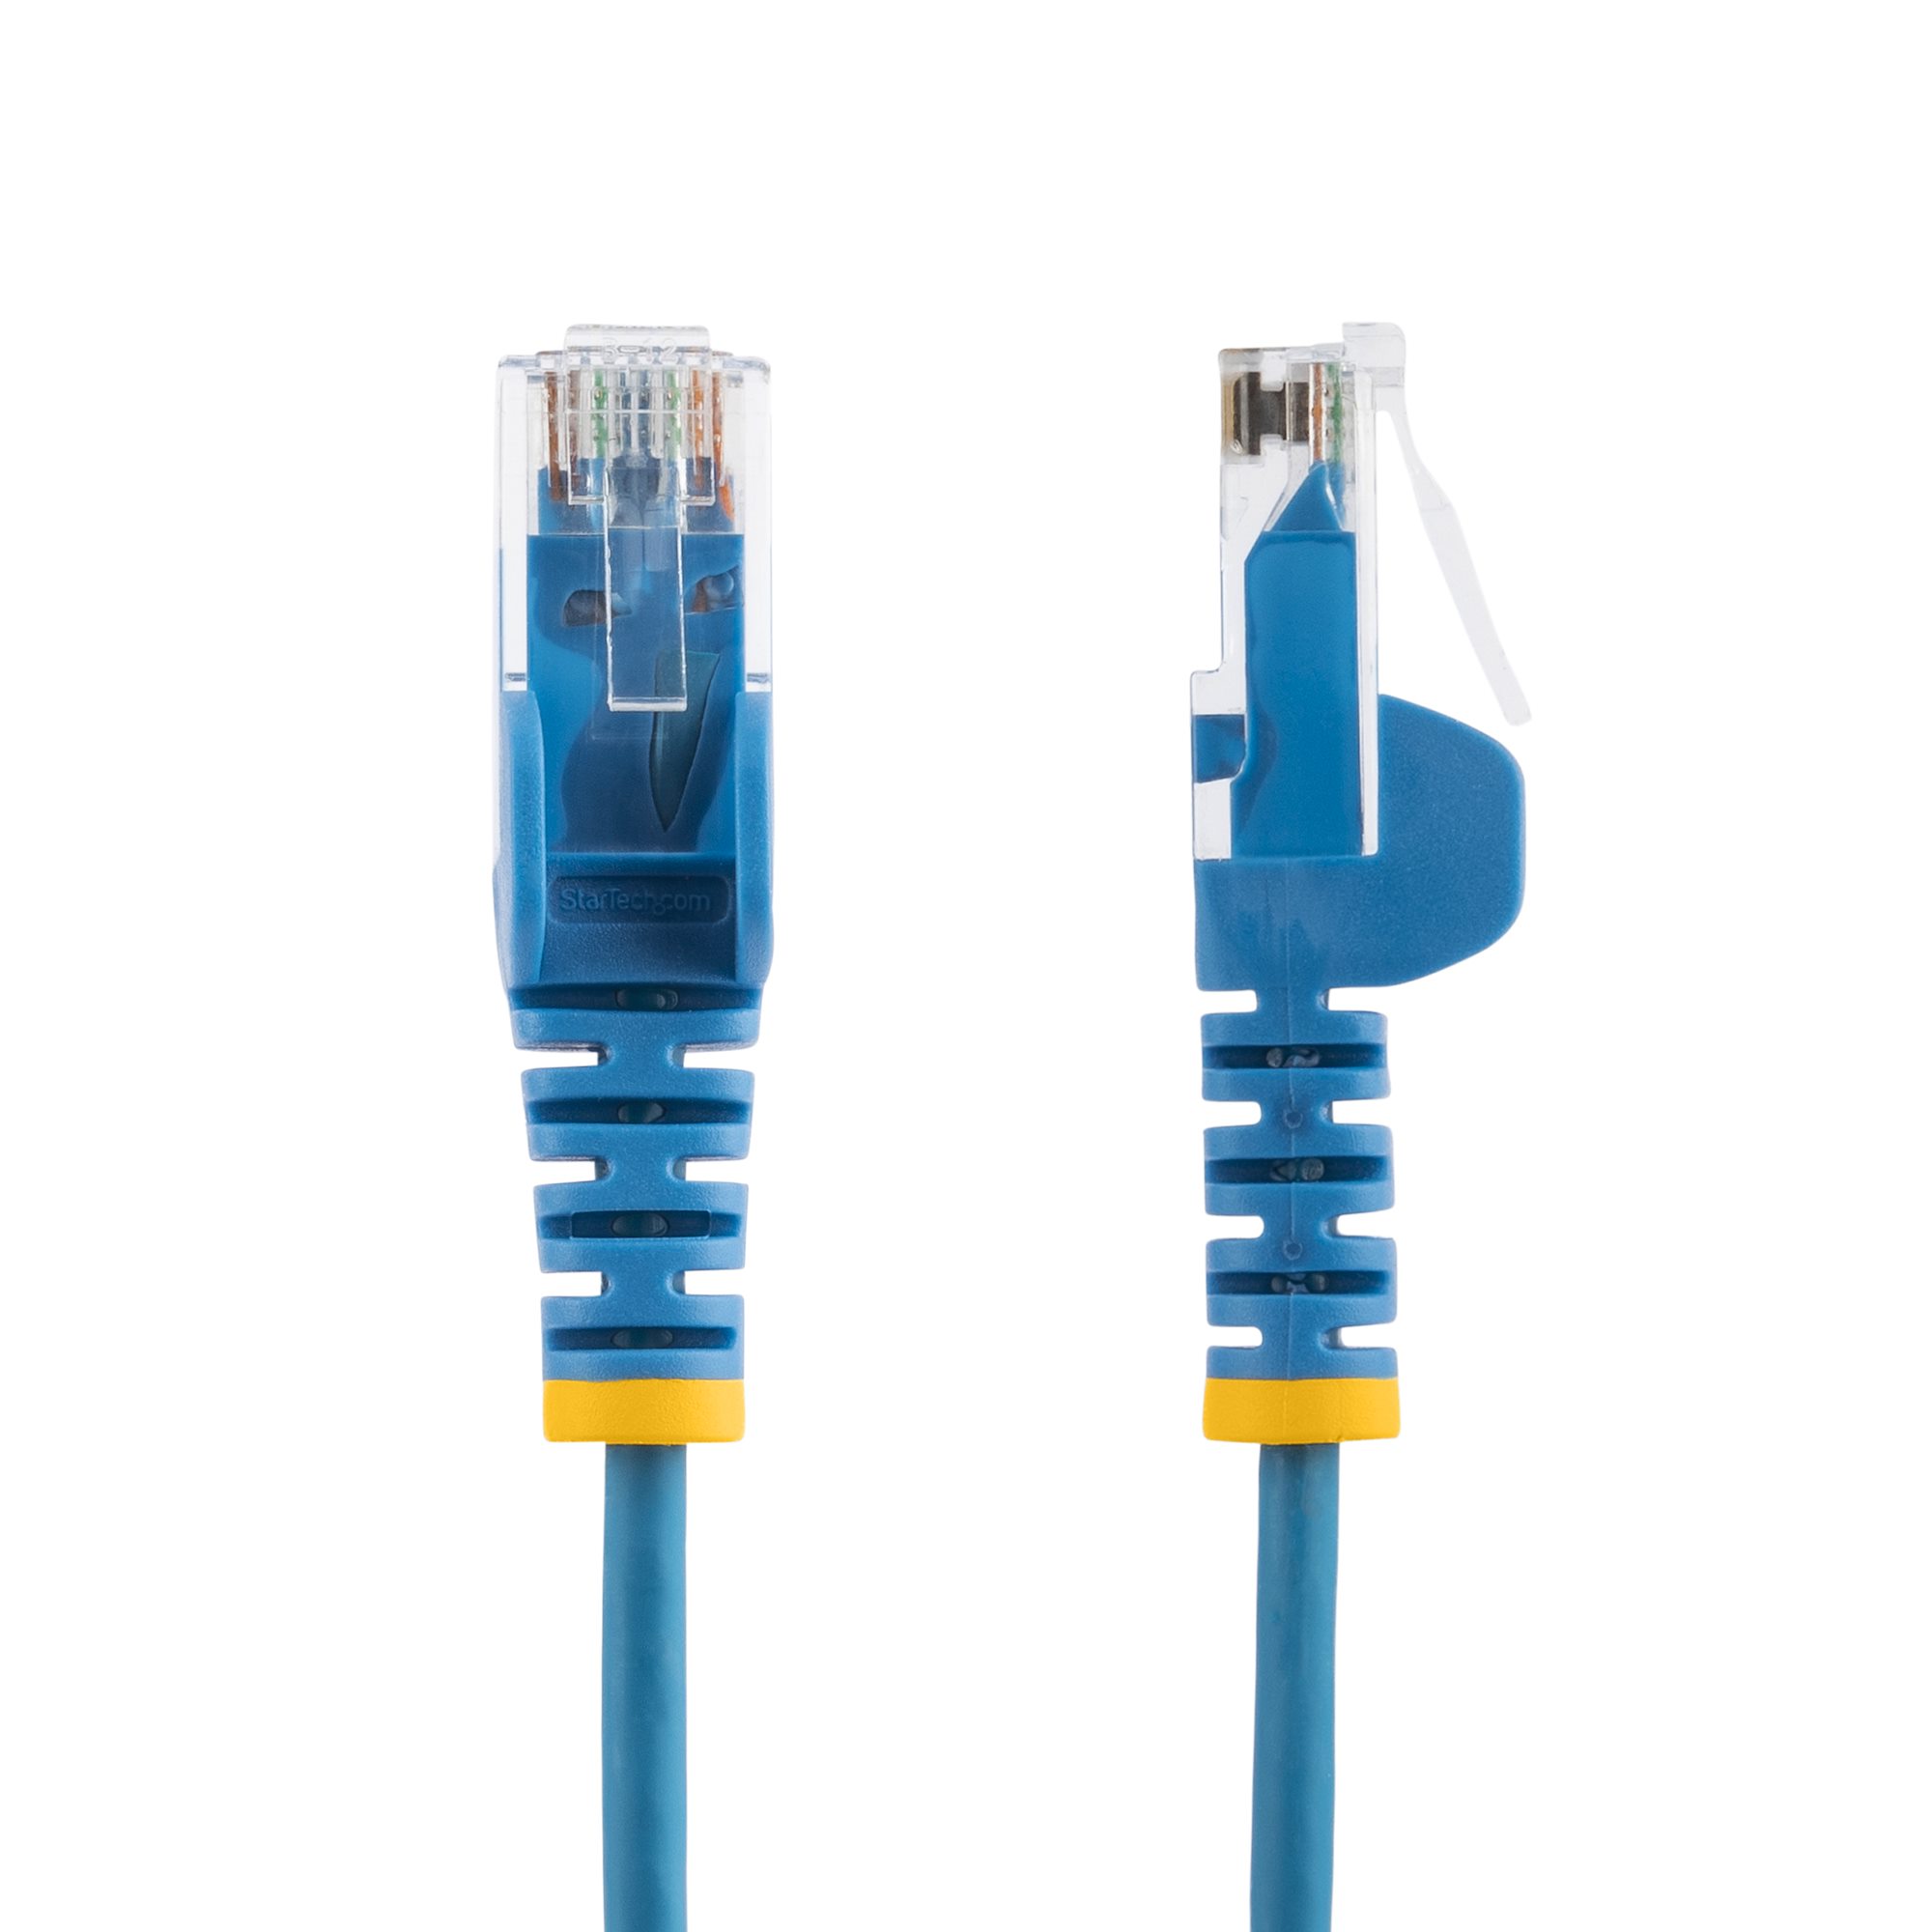 Ethernet Jumper Cable - Ghost Wire Cat5 or Cat6 Ethernet Jumper Cable – THE  CIMPLE CO